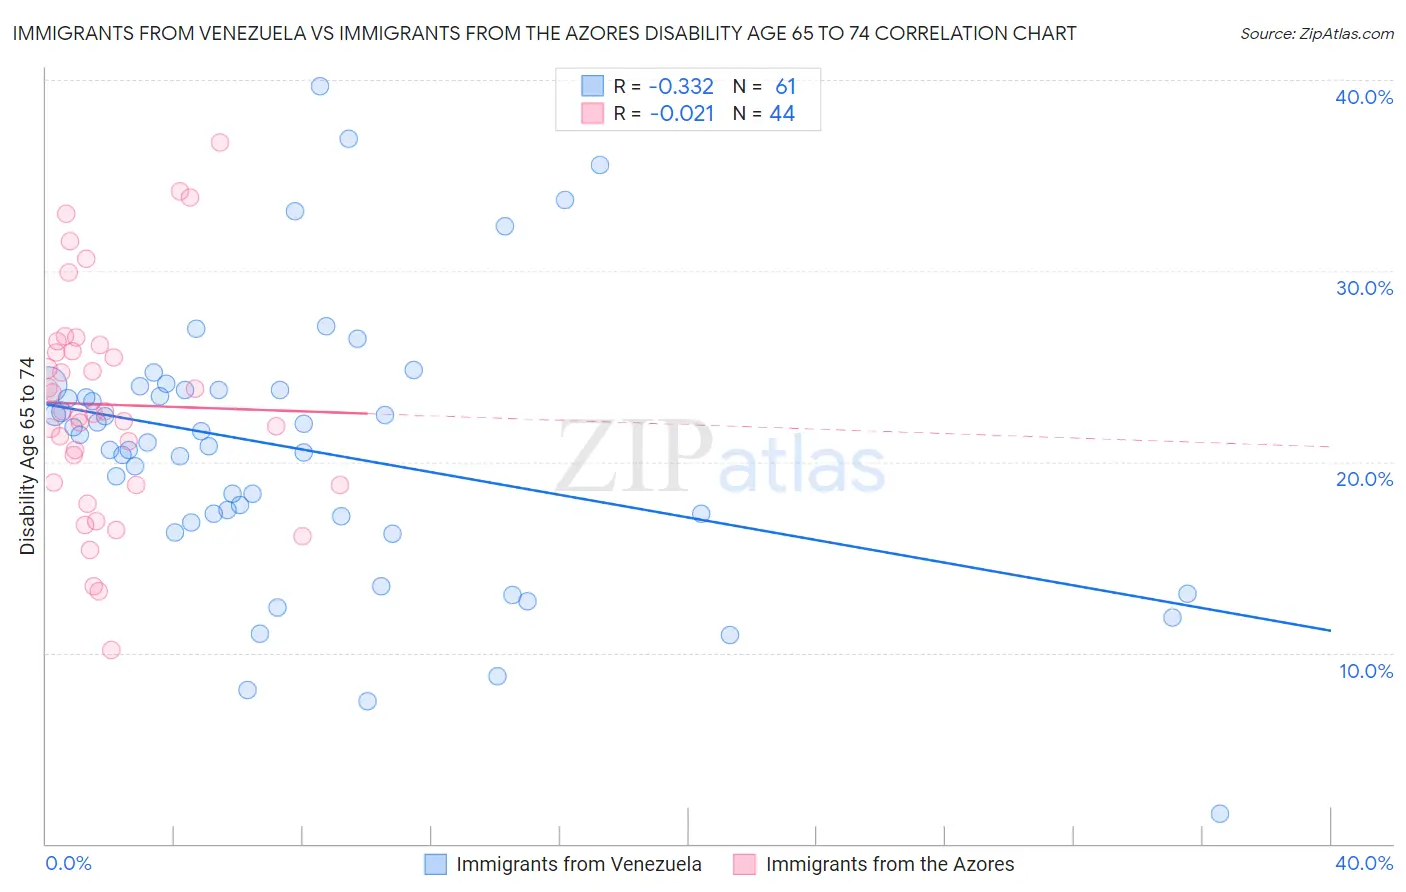 Immigrants from Venezuela vs Immigrants from the Azores Disability Age 65 to 74